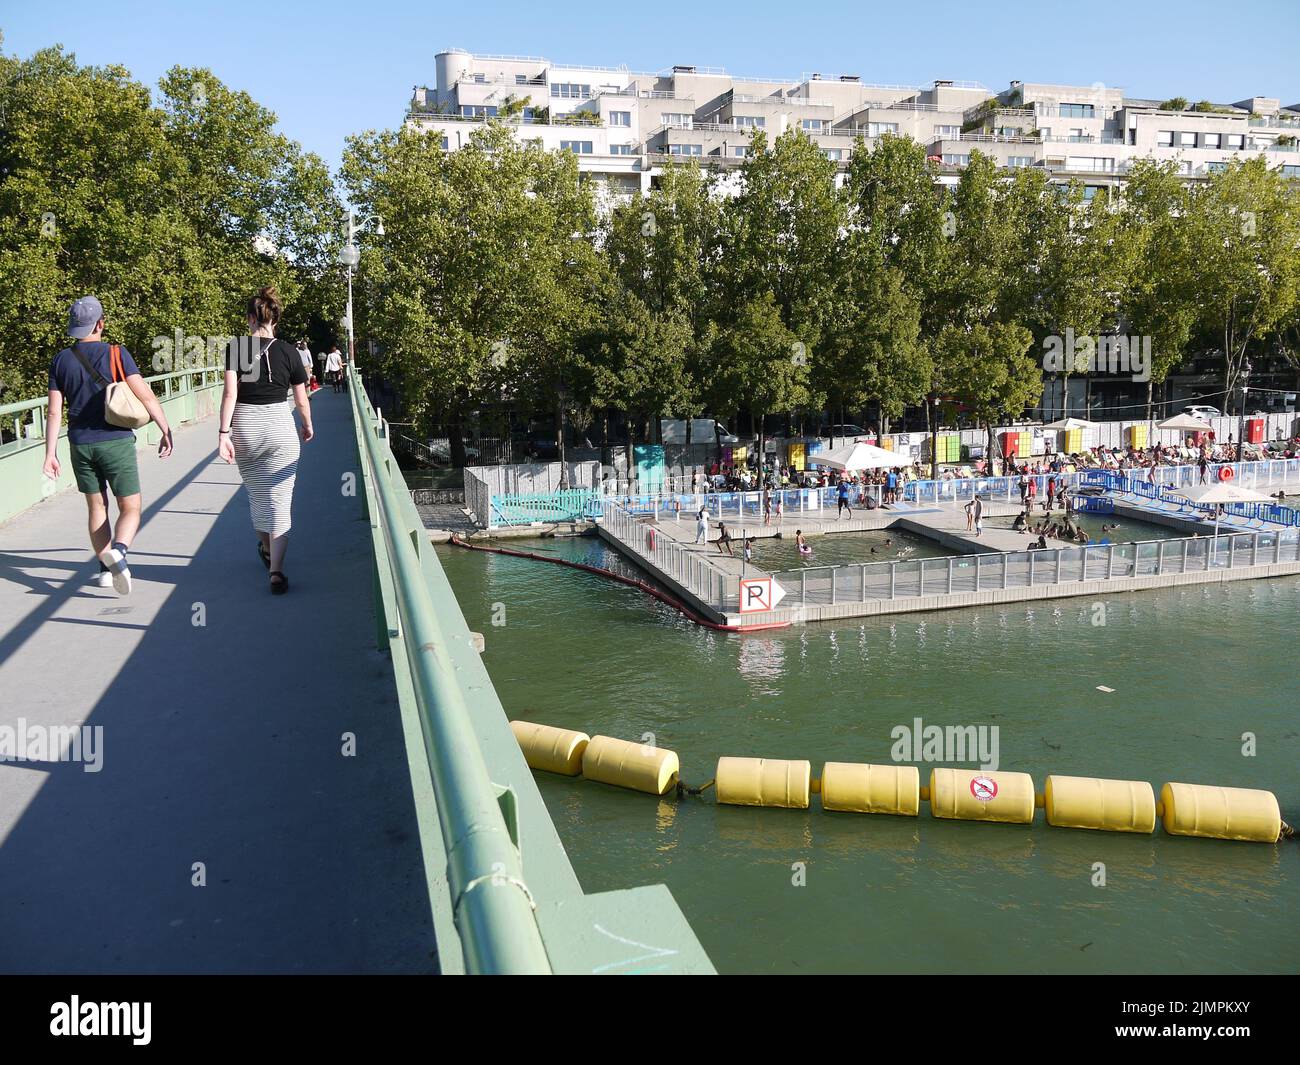 The free swimming pool installed in summer on the Bassin de la Vilette, north of Paris, during Paris-Plage Stock Photo